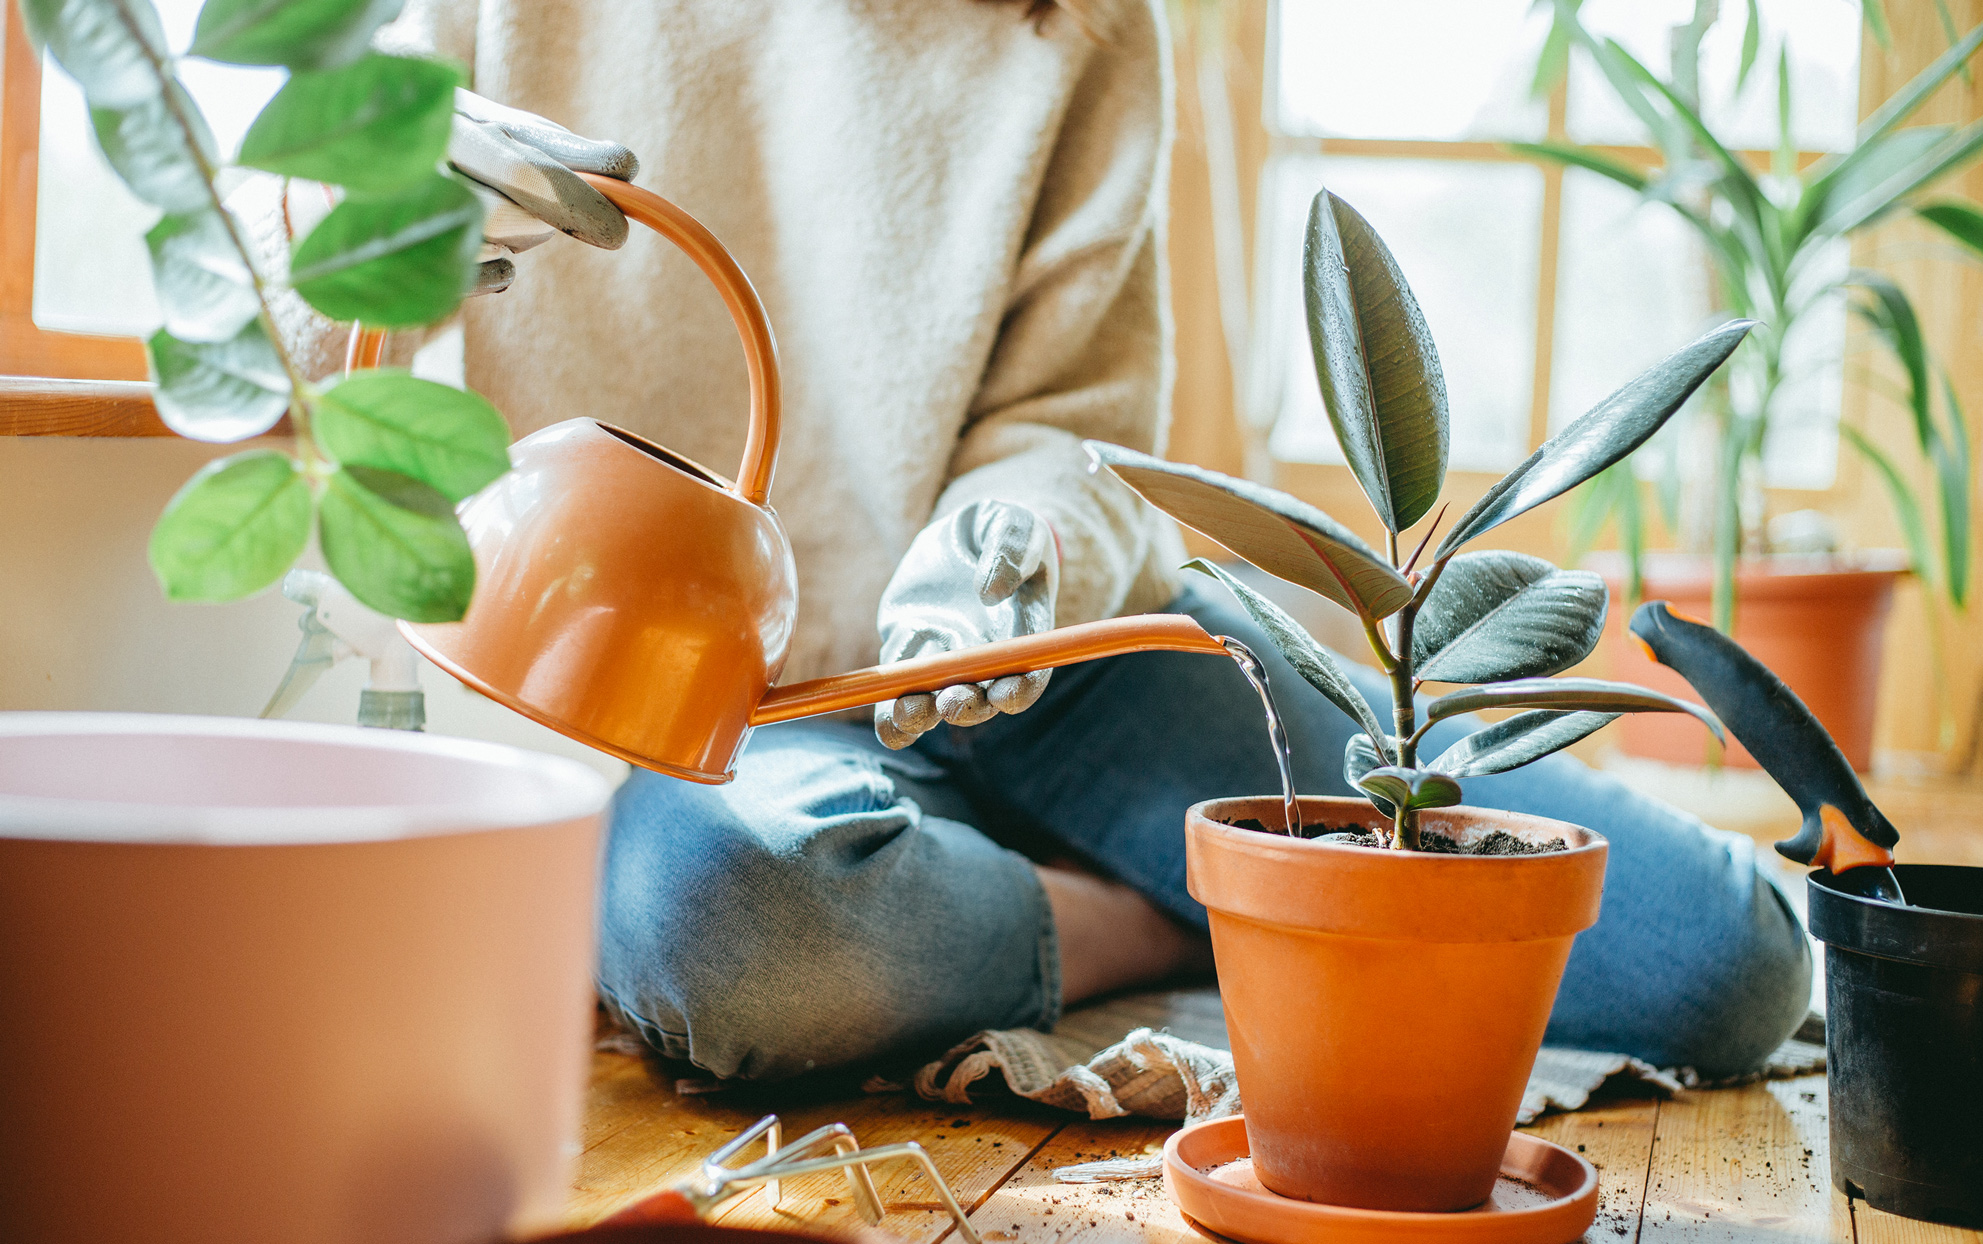 Mistakes to Avoid with Indoor Plants